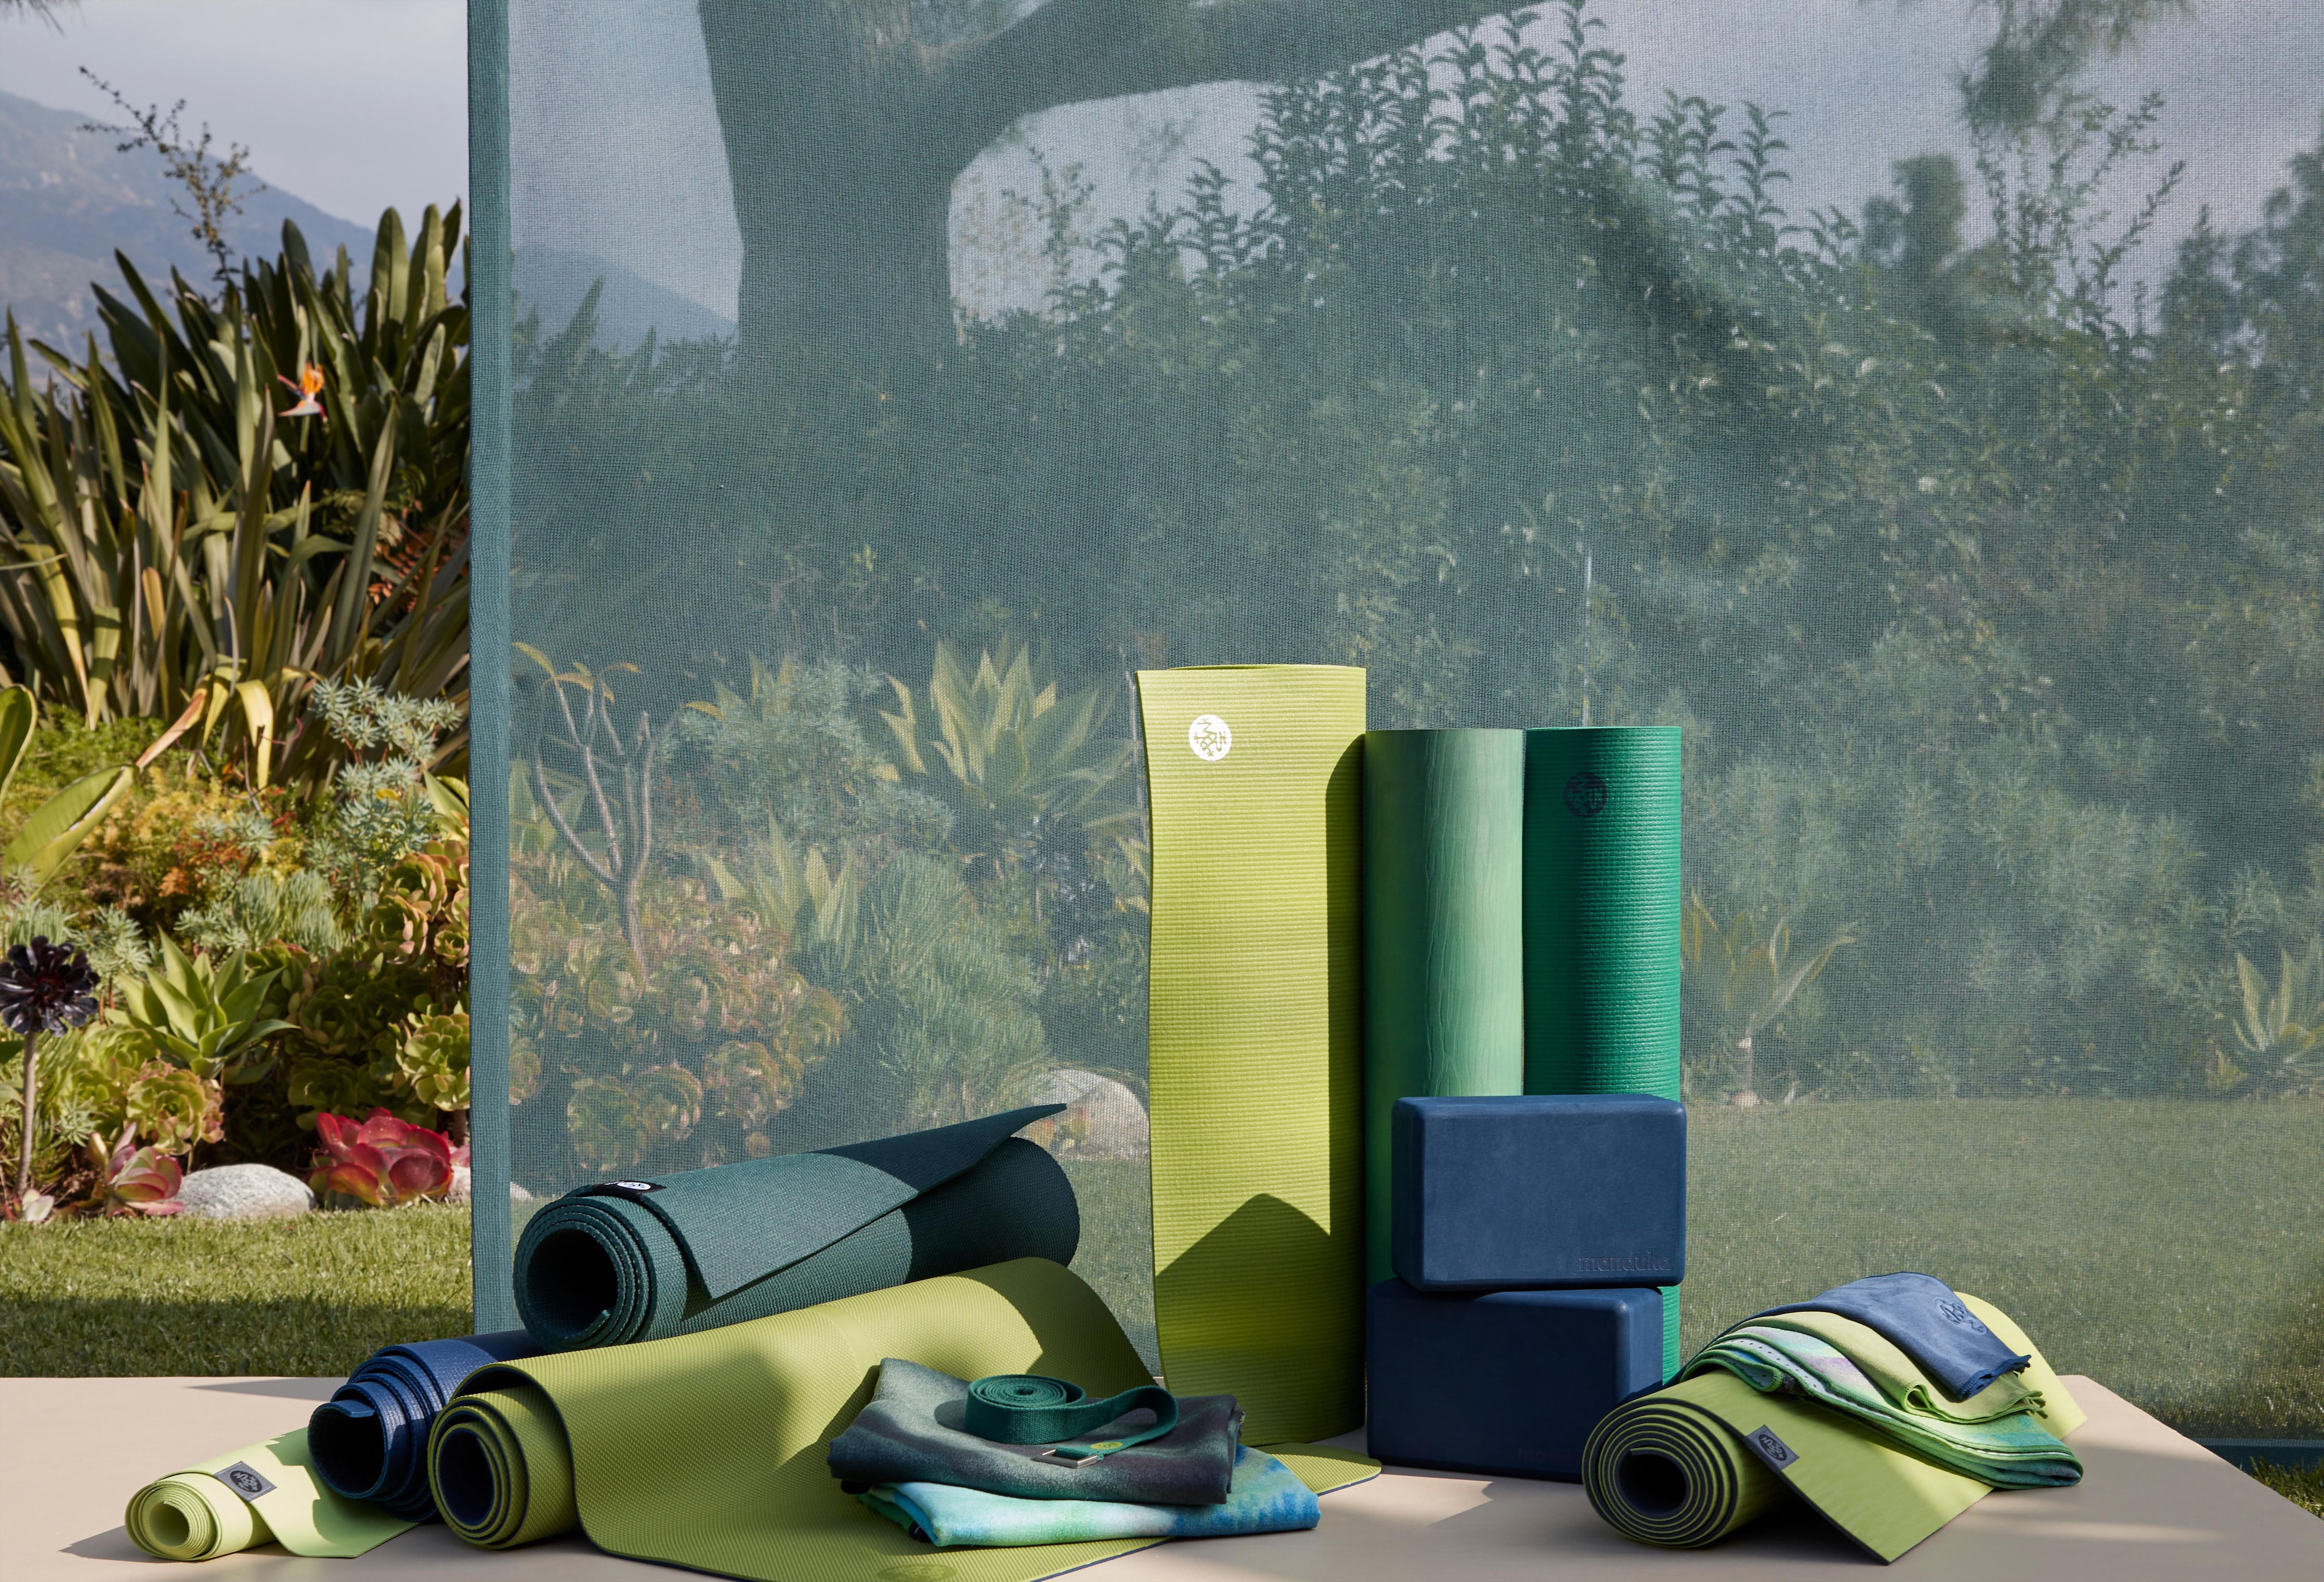 PRO® and eKO® series yoga mats displayed outside in a grassy yard